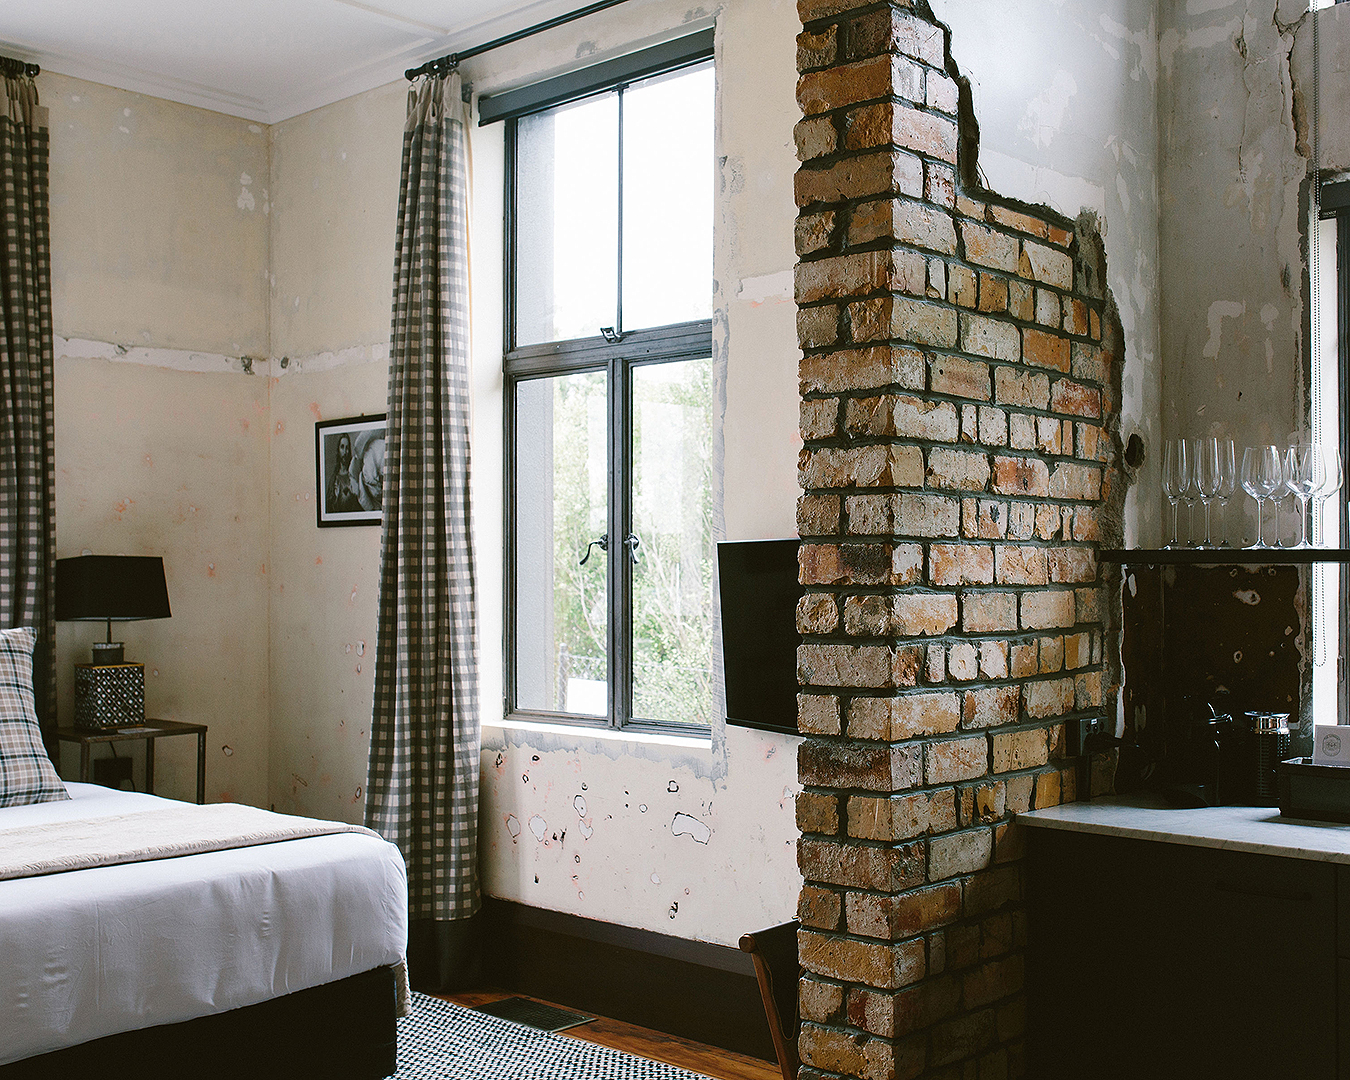 An exposed brick wall in a room at the Convent Hotel.